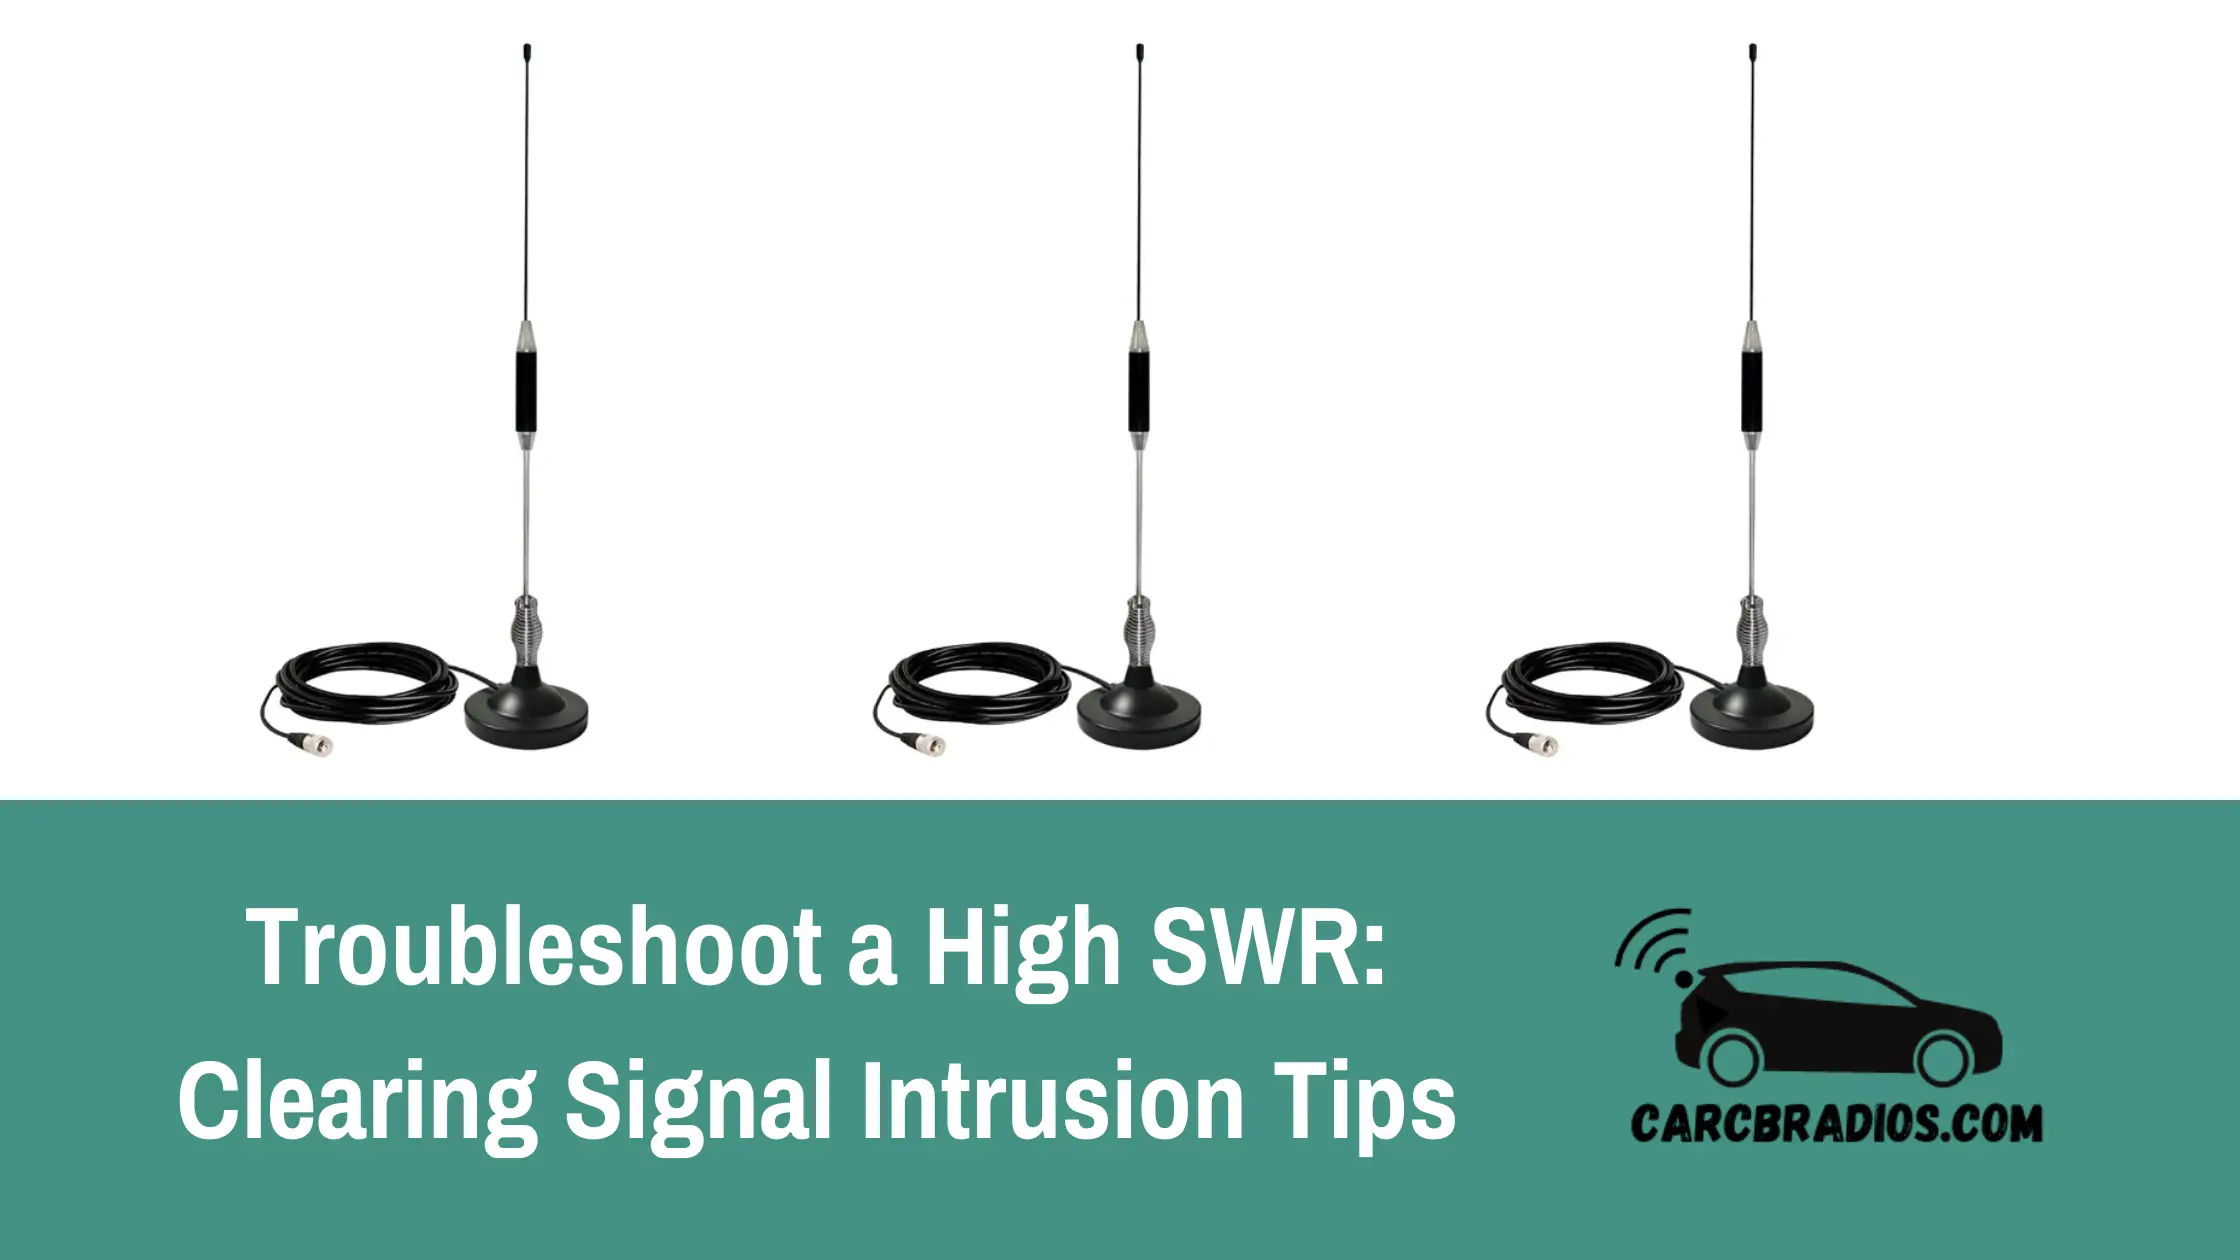 One of the most common causes of high SWR is a short or poor quality CB coax. Other factors that can contribute to high SWR include a broken or poorly mounted antenna, obstructions in the antenna's location, and a poor electrical ground. By following the tips in this article, you can identify and address these issues to improve your CB radio's performance.